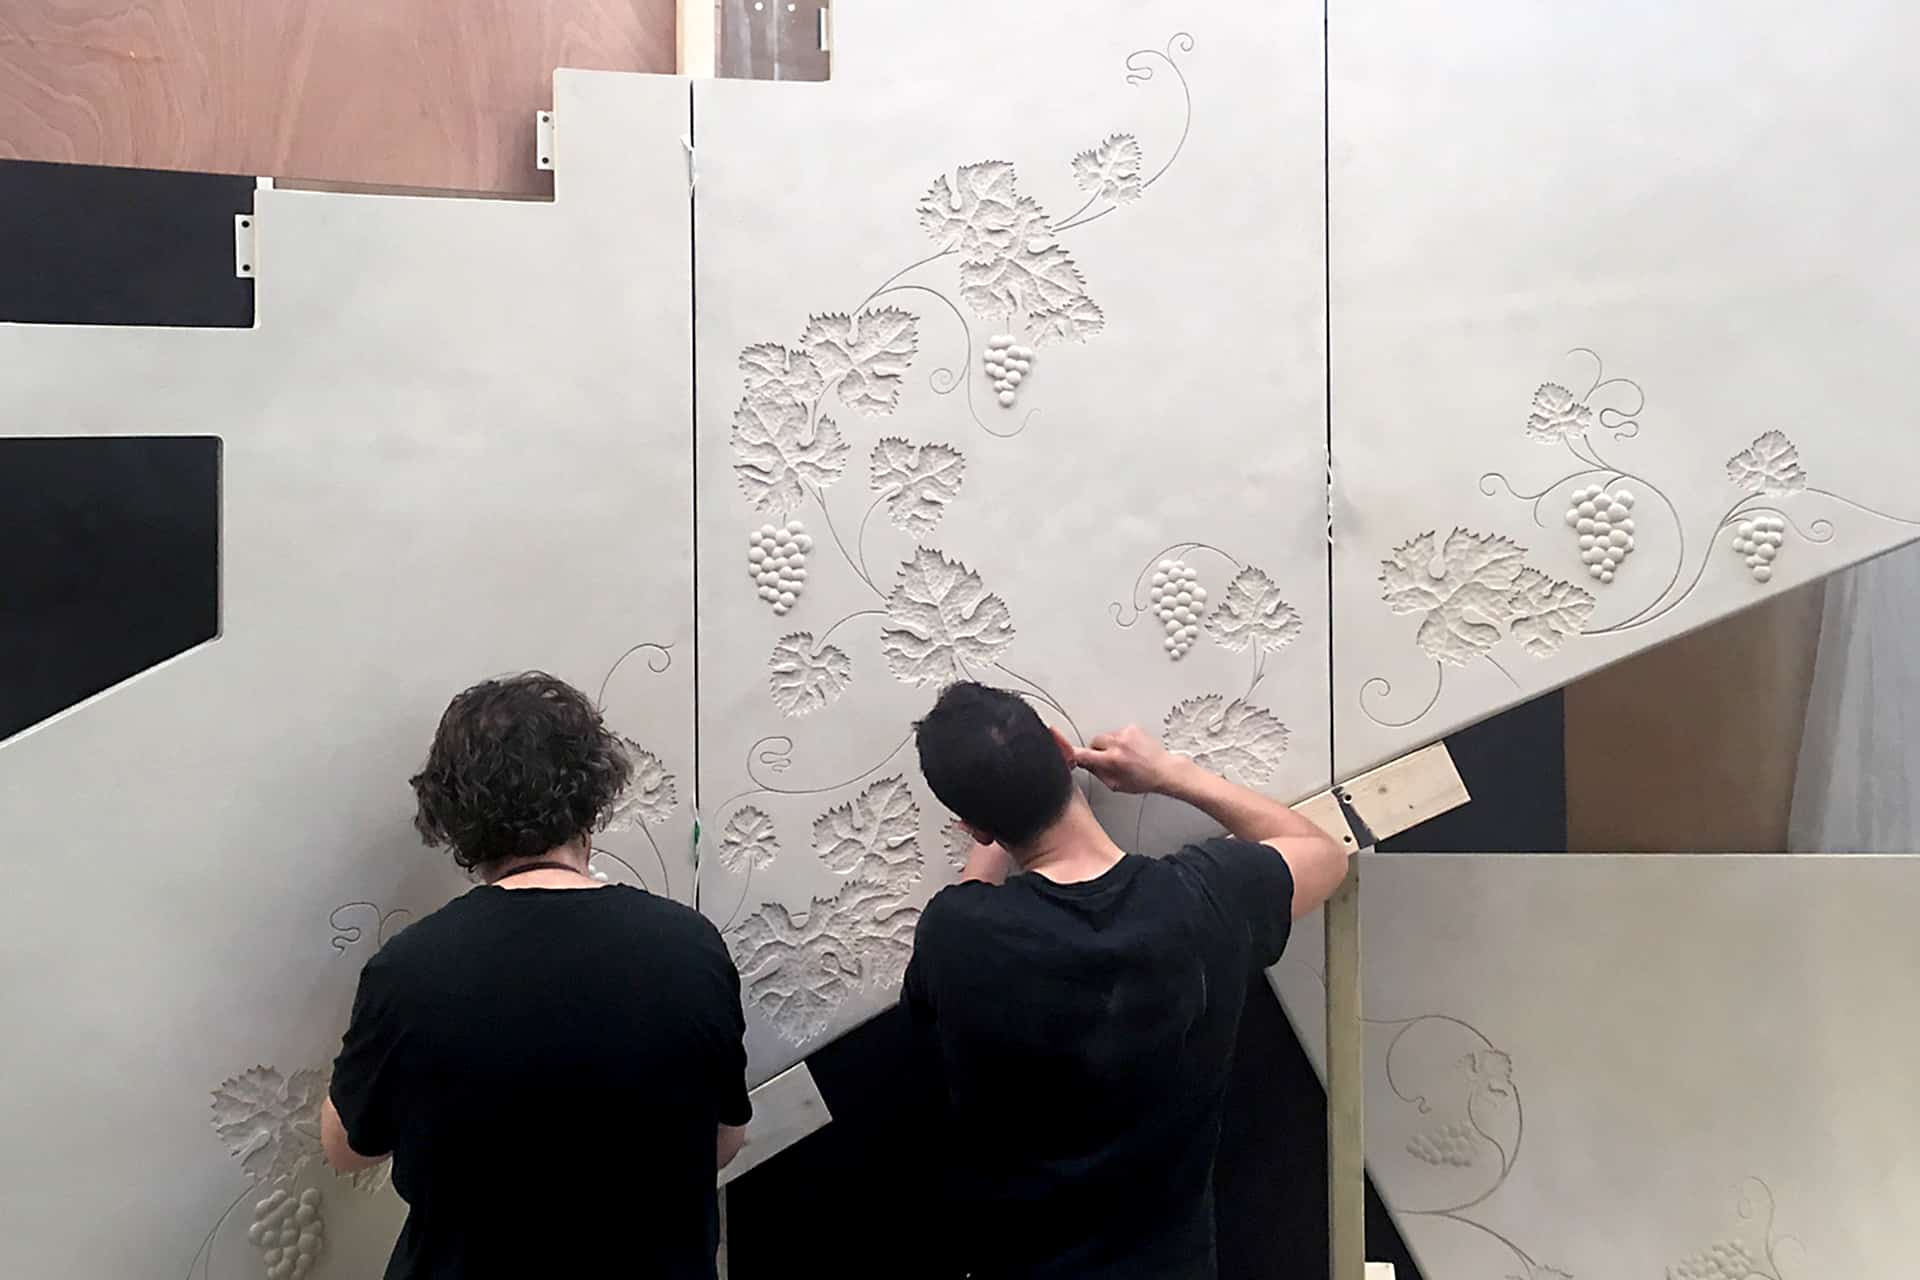 Work in progress on curved bas-relief panels. Photo by DKT Artworks.